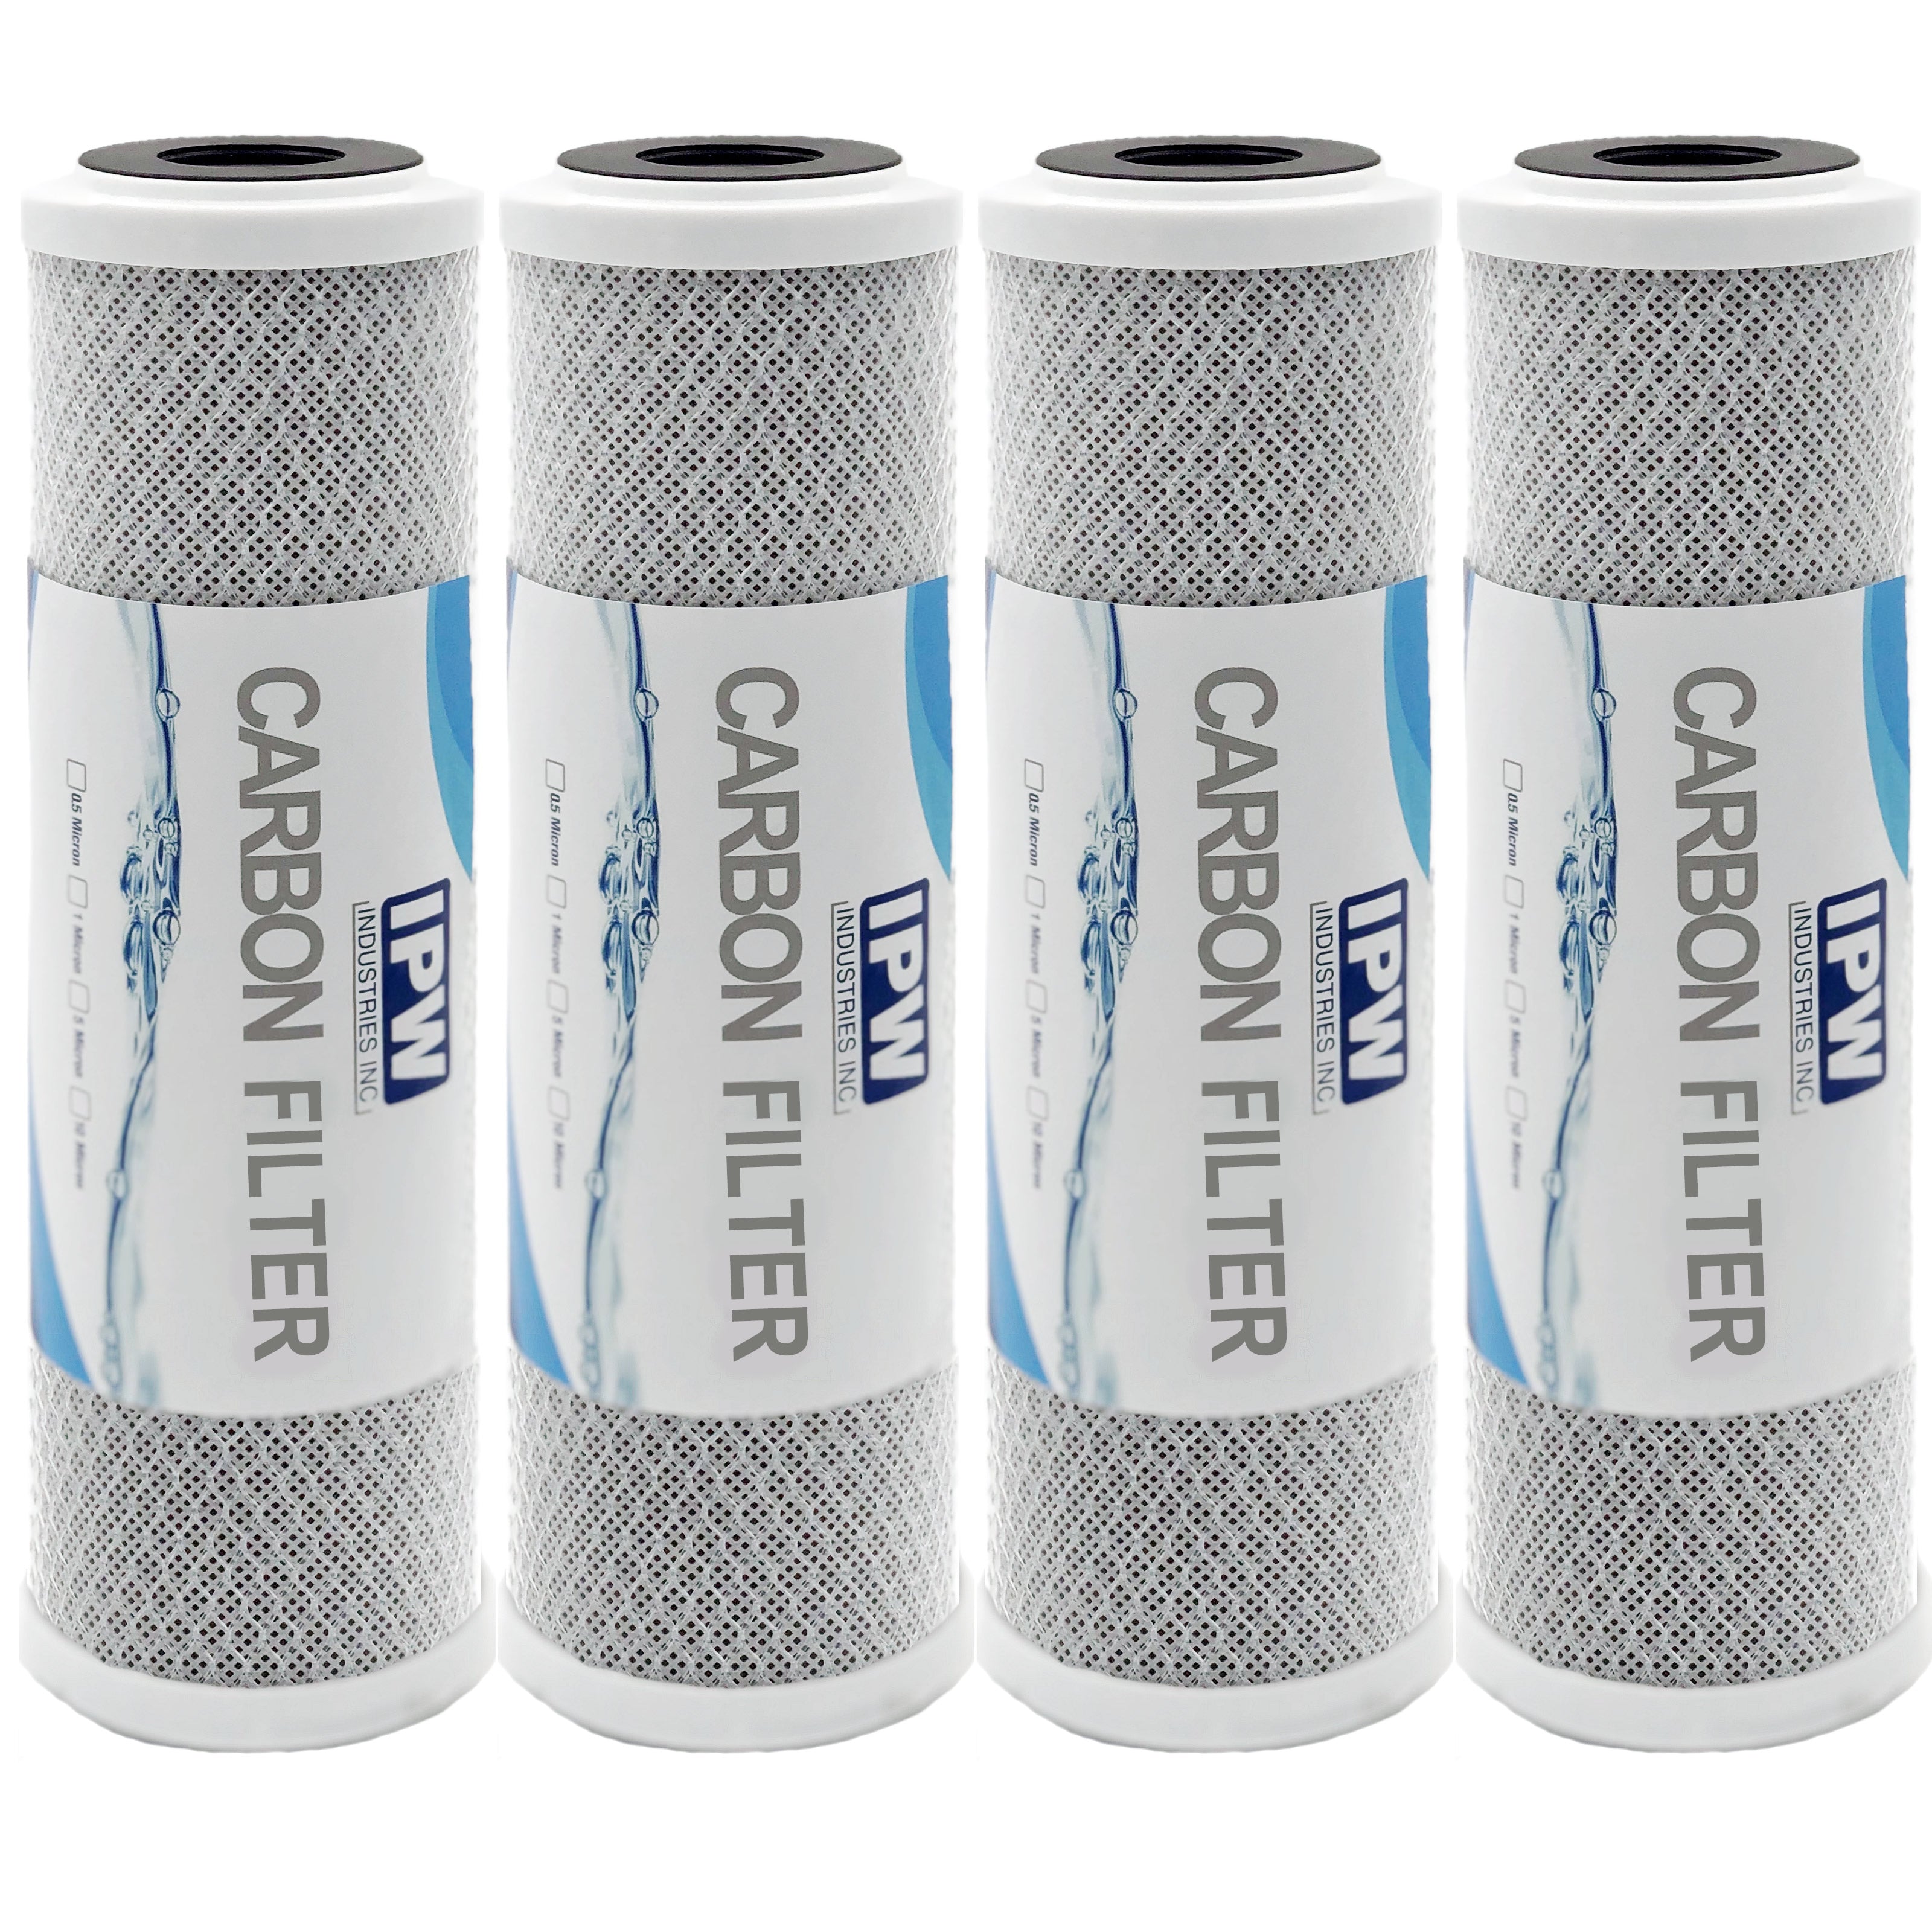 Set Of 4 Compatible For Water Filter Ge Gxwh04f, Gxwh20f, Gxwh20s & Gxrm10 Multi-pack, Carbon Block Replacement Cartridge By Ipw Industries Inc.